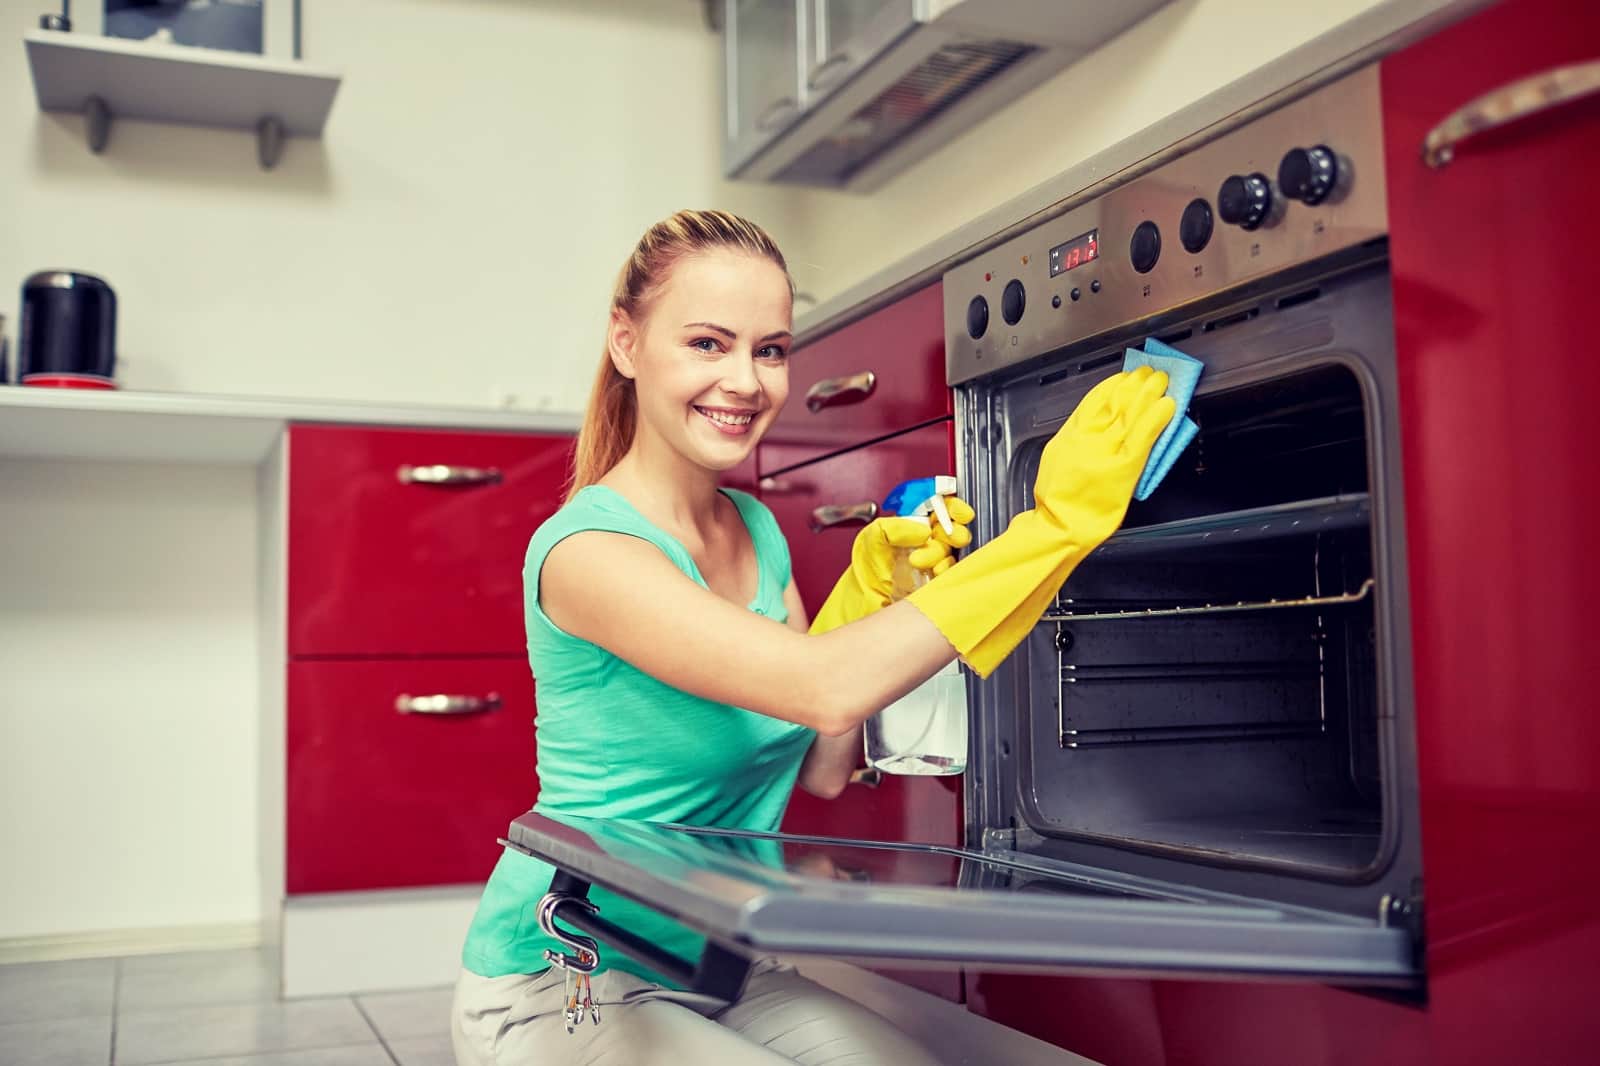 https://devices4home.com/wp-content/uploads/2019/02/clean-oven-min.jpg